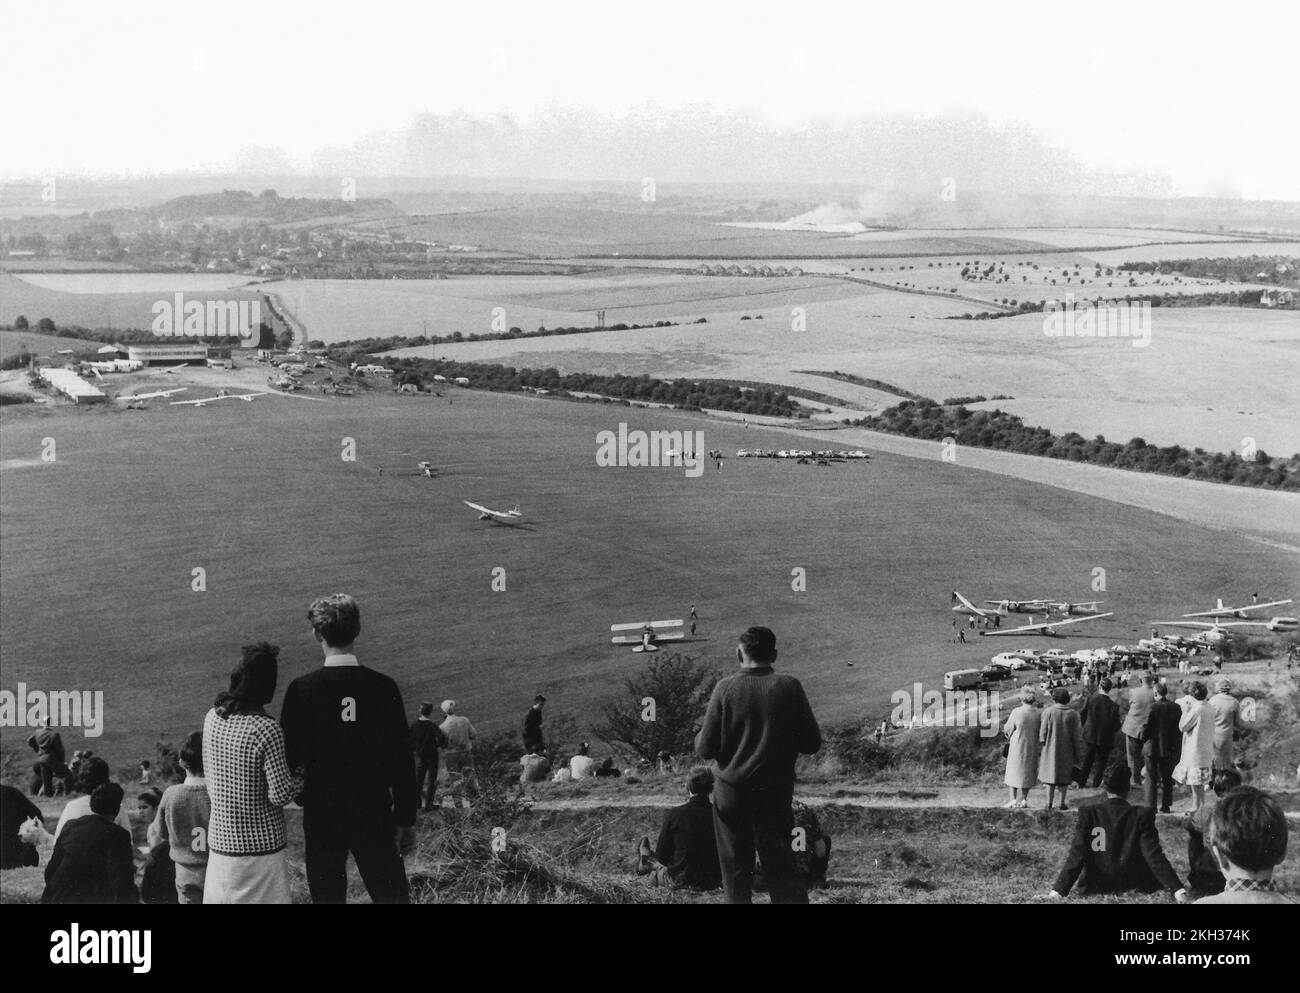 1966 archive. People on Dunstable Downs, Chiltern Hills looking down onto an air event taking place at the London Gliding Club airfield below Stock Photo